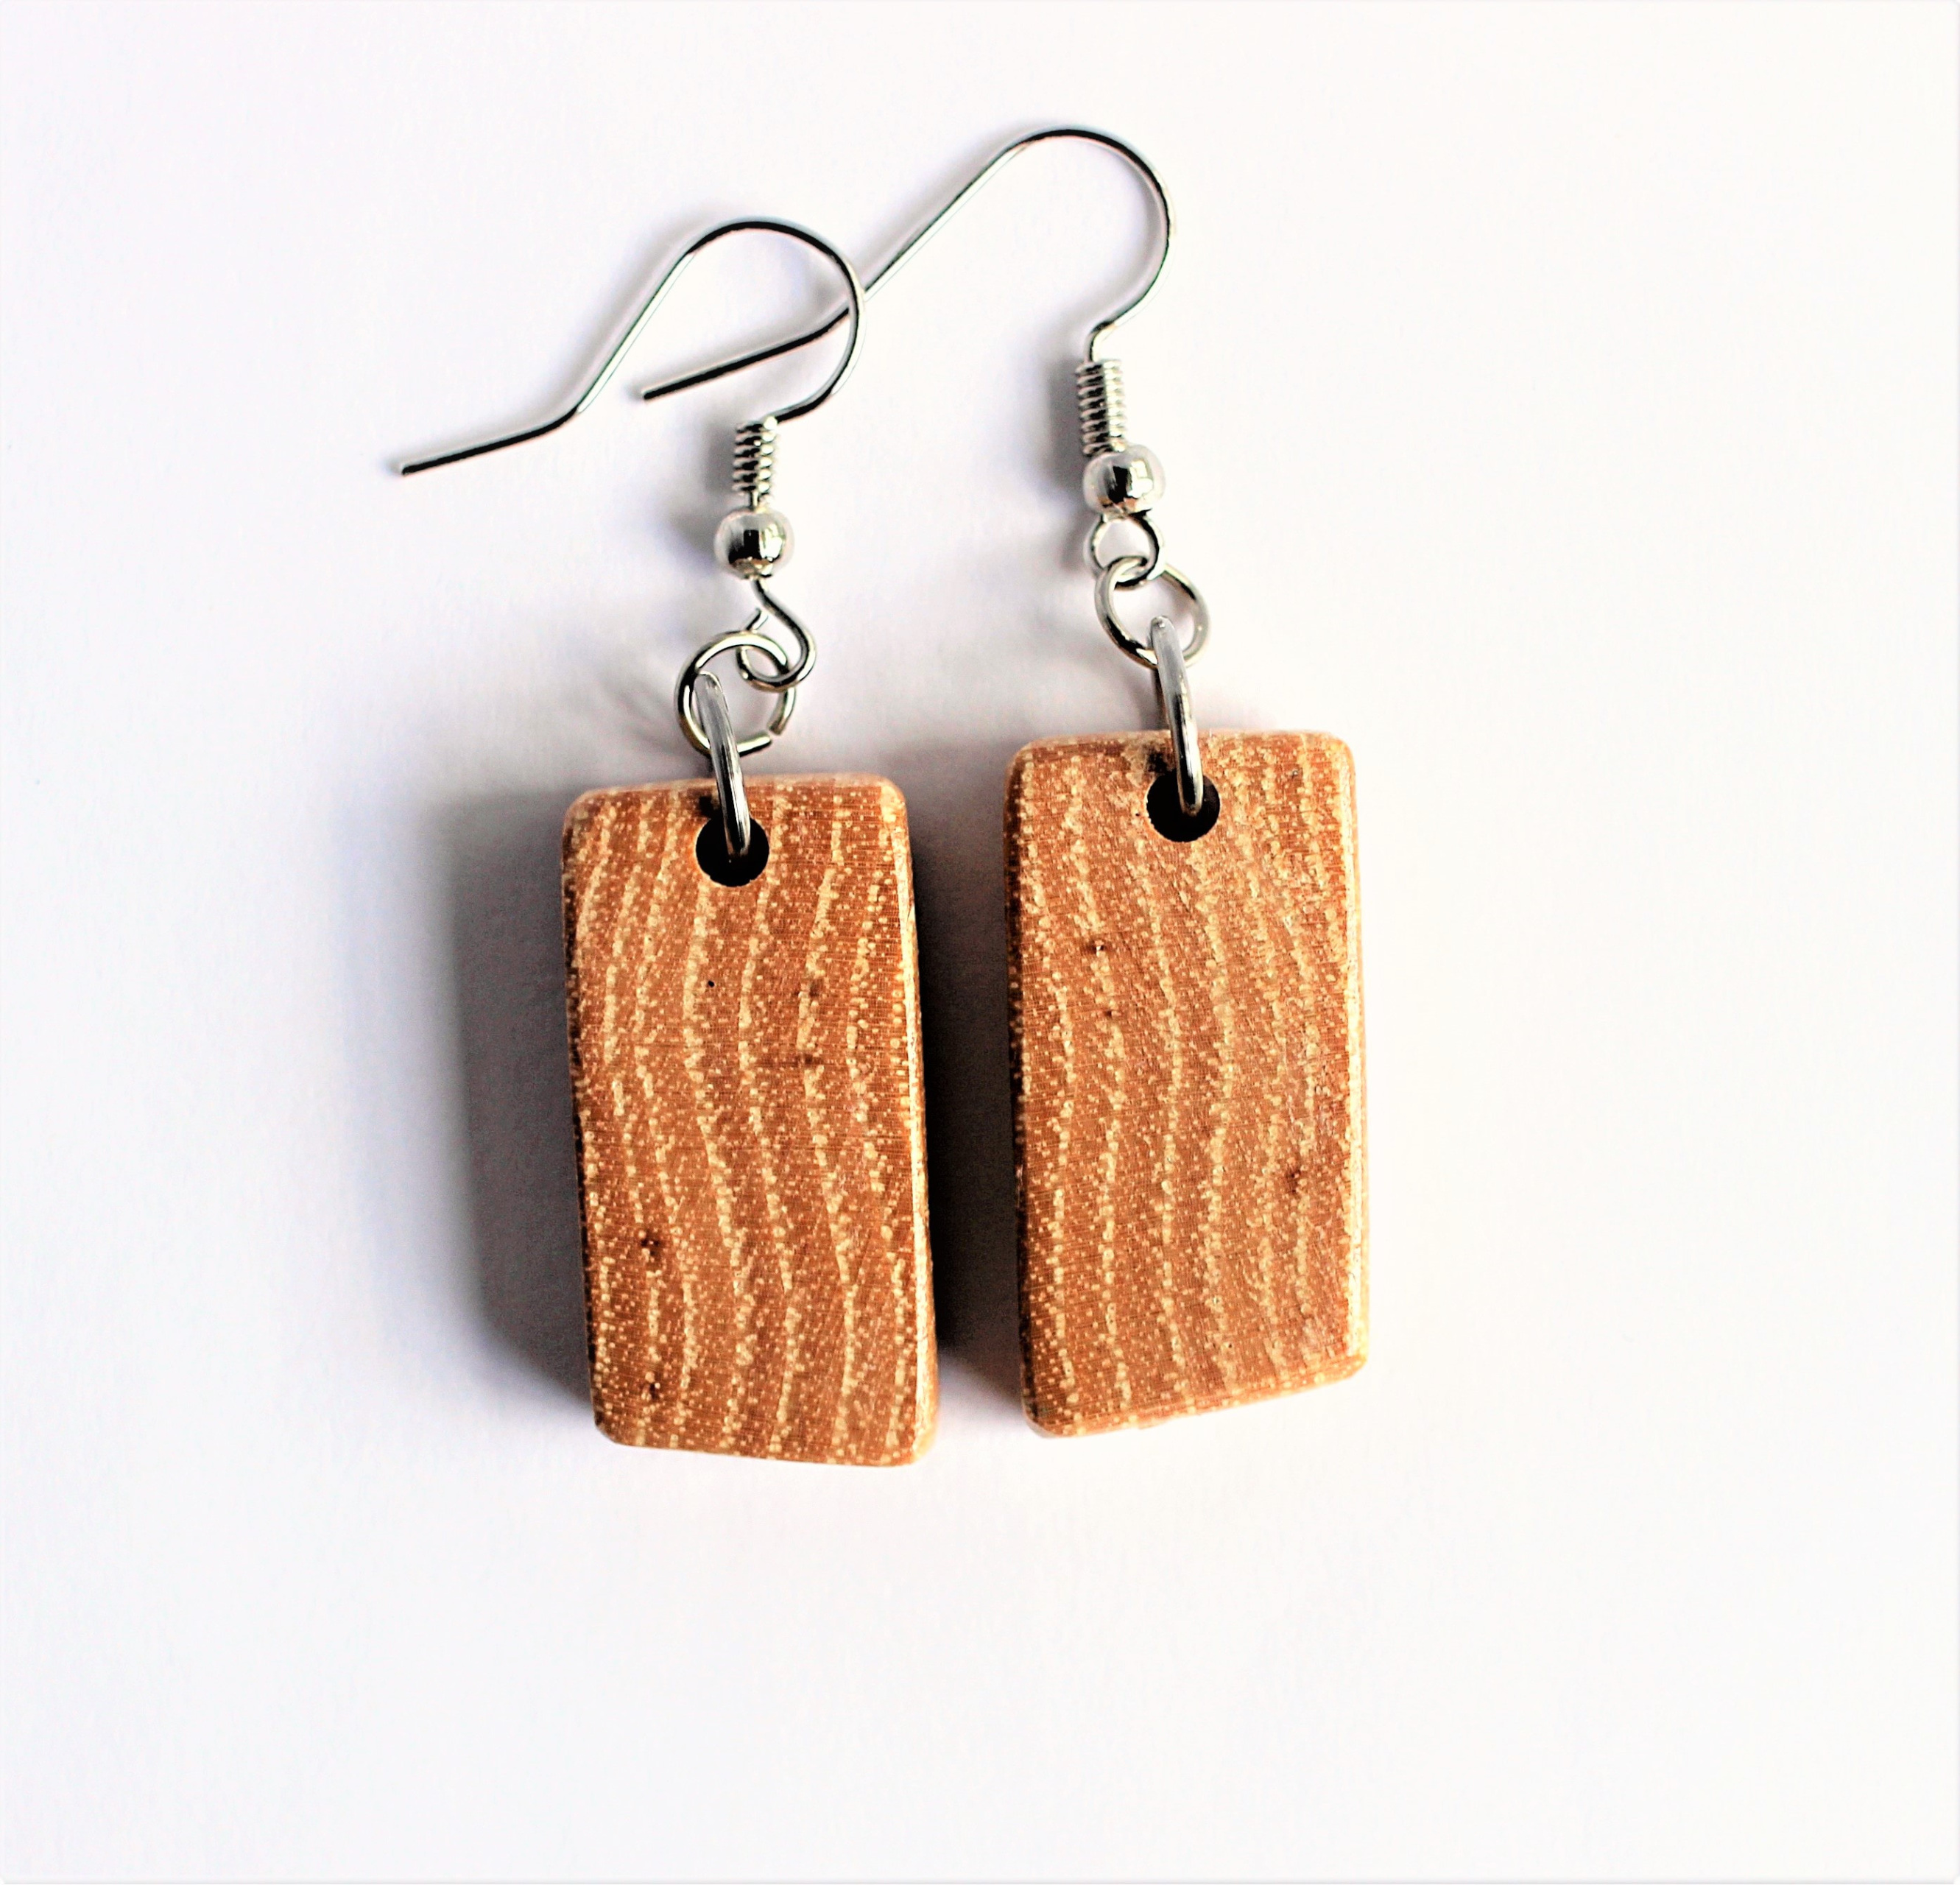 Buy Craft Fortune stylish wood earrings , wooden earrings at Amazon.in